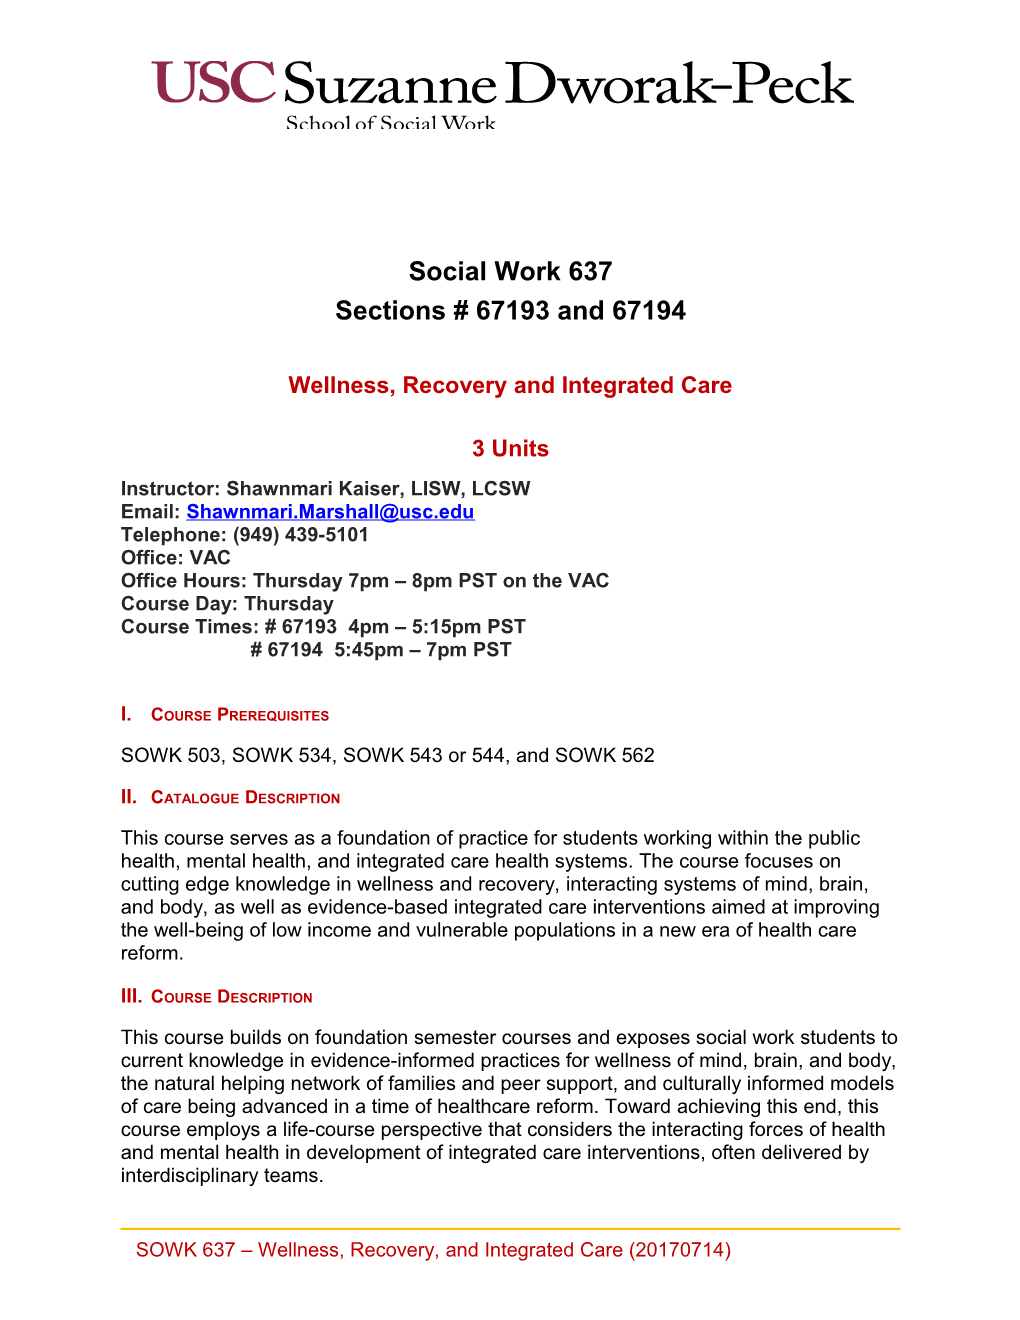 School of Social Work Syllabus Template Guide s4